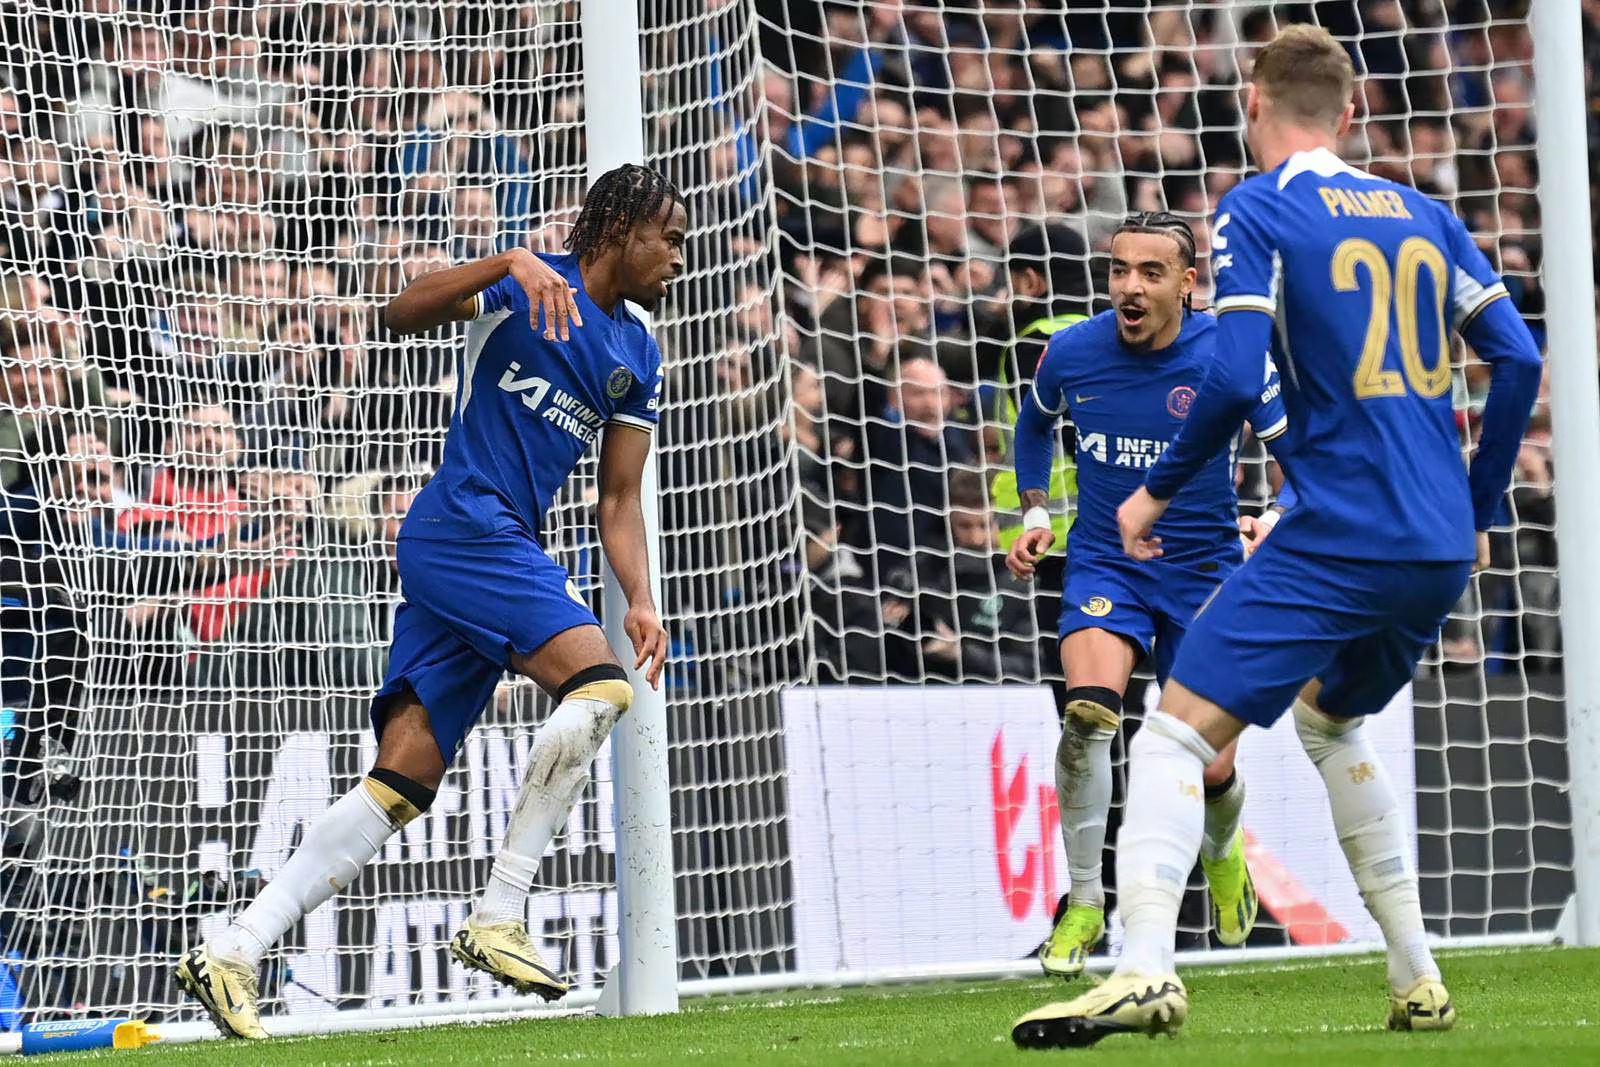 Blues' Late Surge Secures Thrilling FA Cup Win over 10-Man Foxes | FA CUP